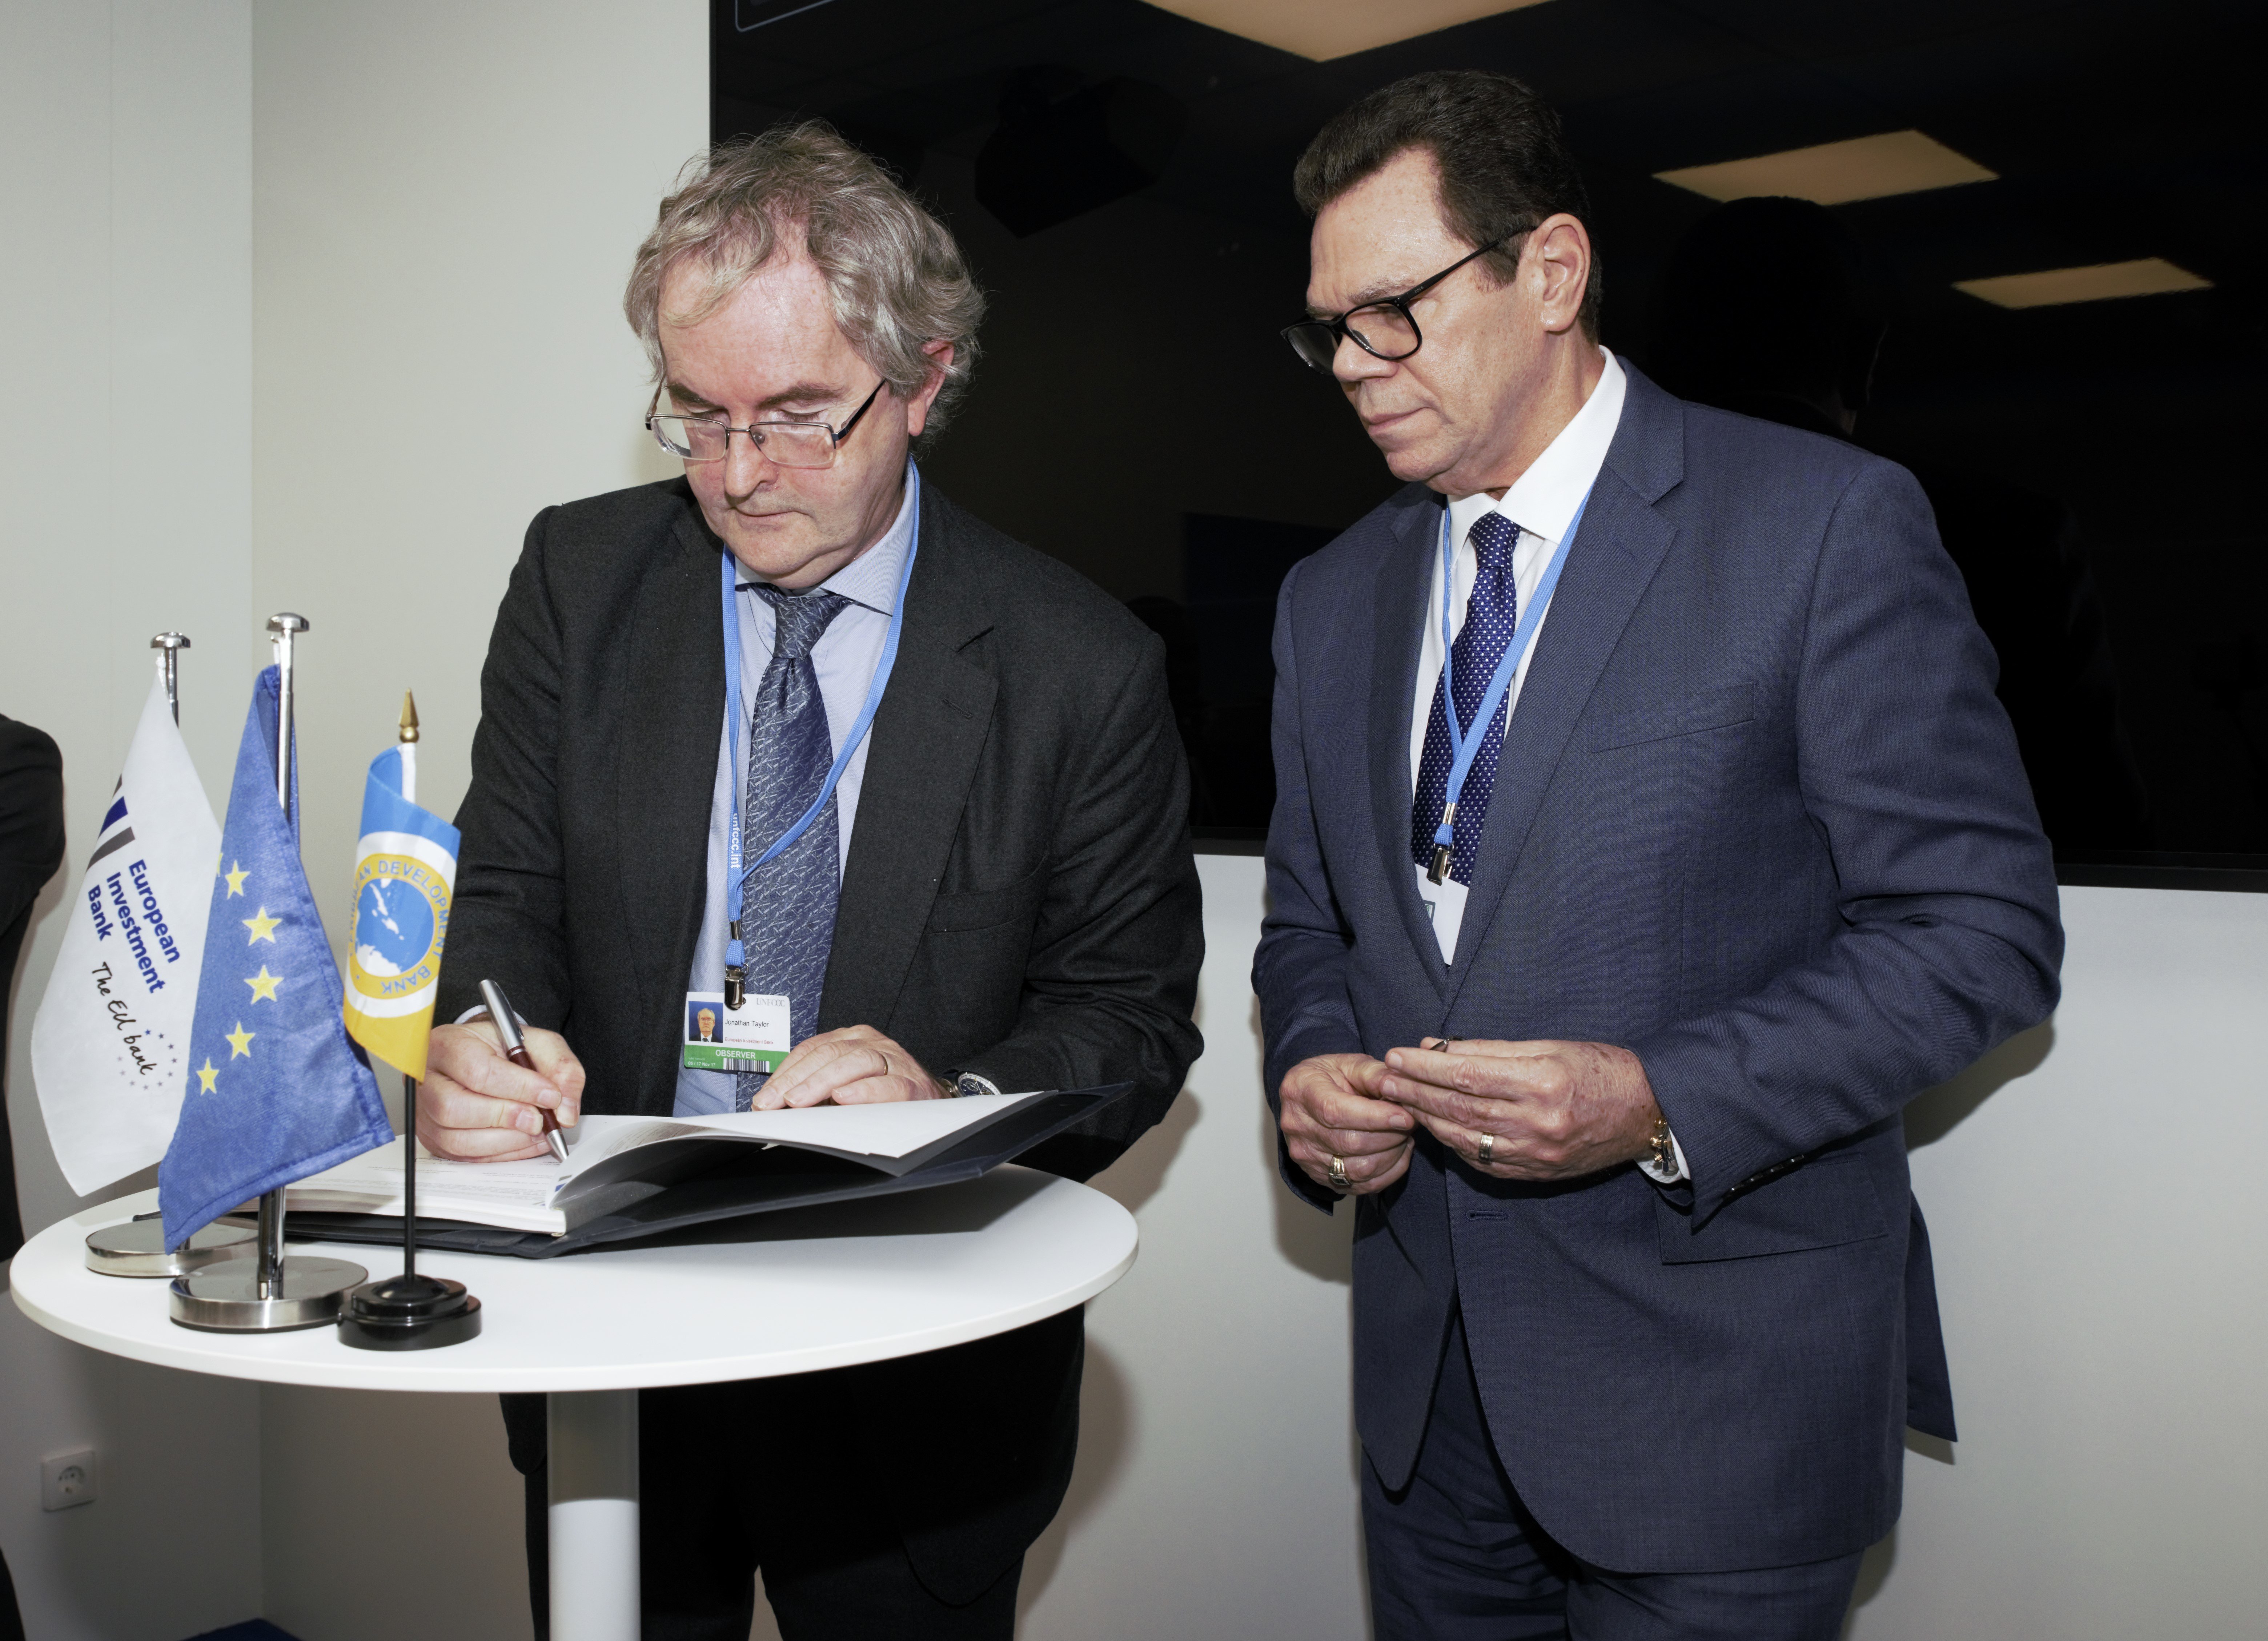 EIB Vice President responsible for Climate Action, Jonathan Taylor (left) and CDB President, Dr. Wm. Warren Smith (right) sign the agreement in Bonn on November 13, 2017